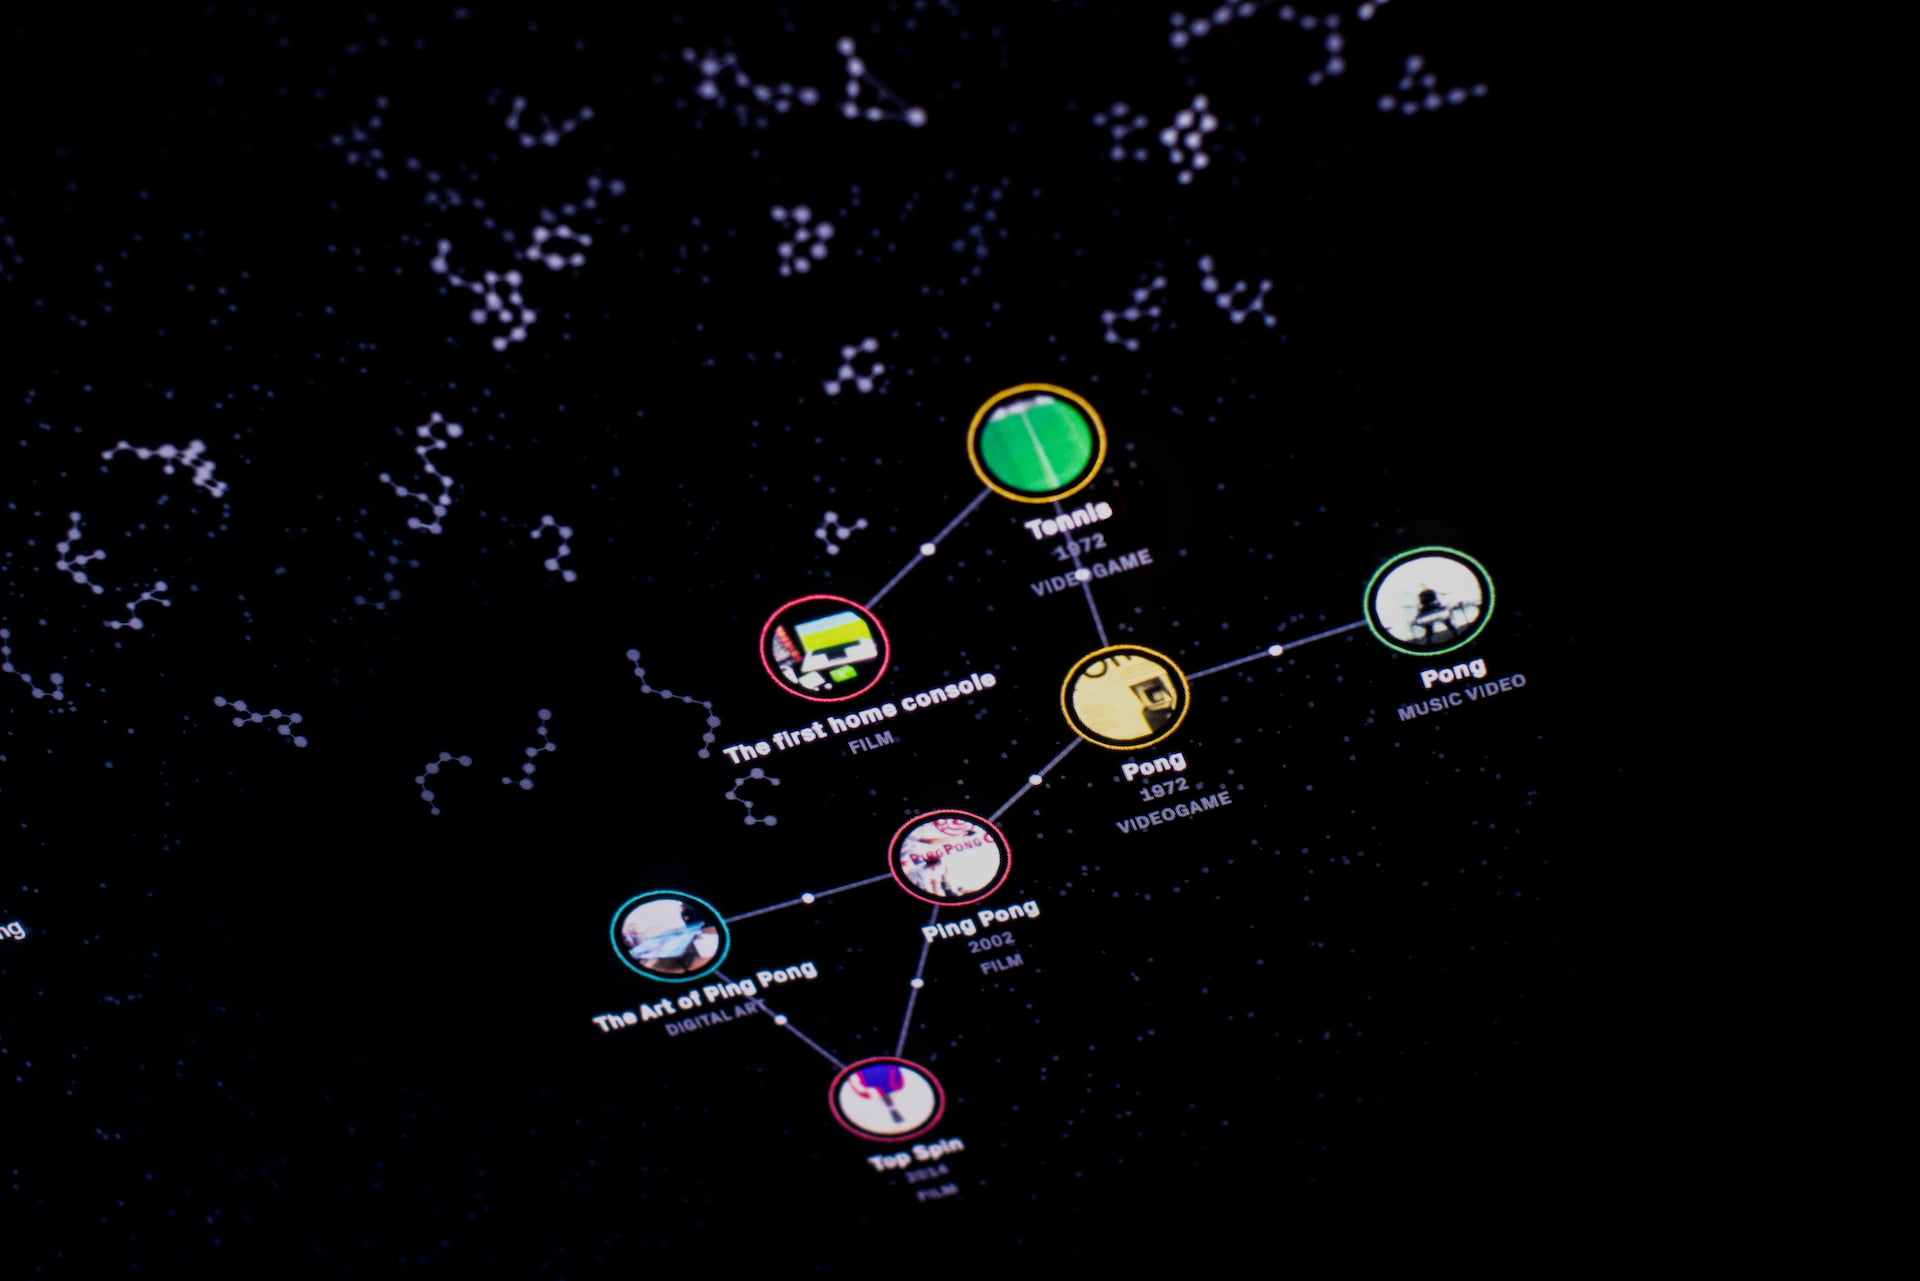 Close up of a constellation and its connected nodes.